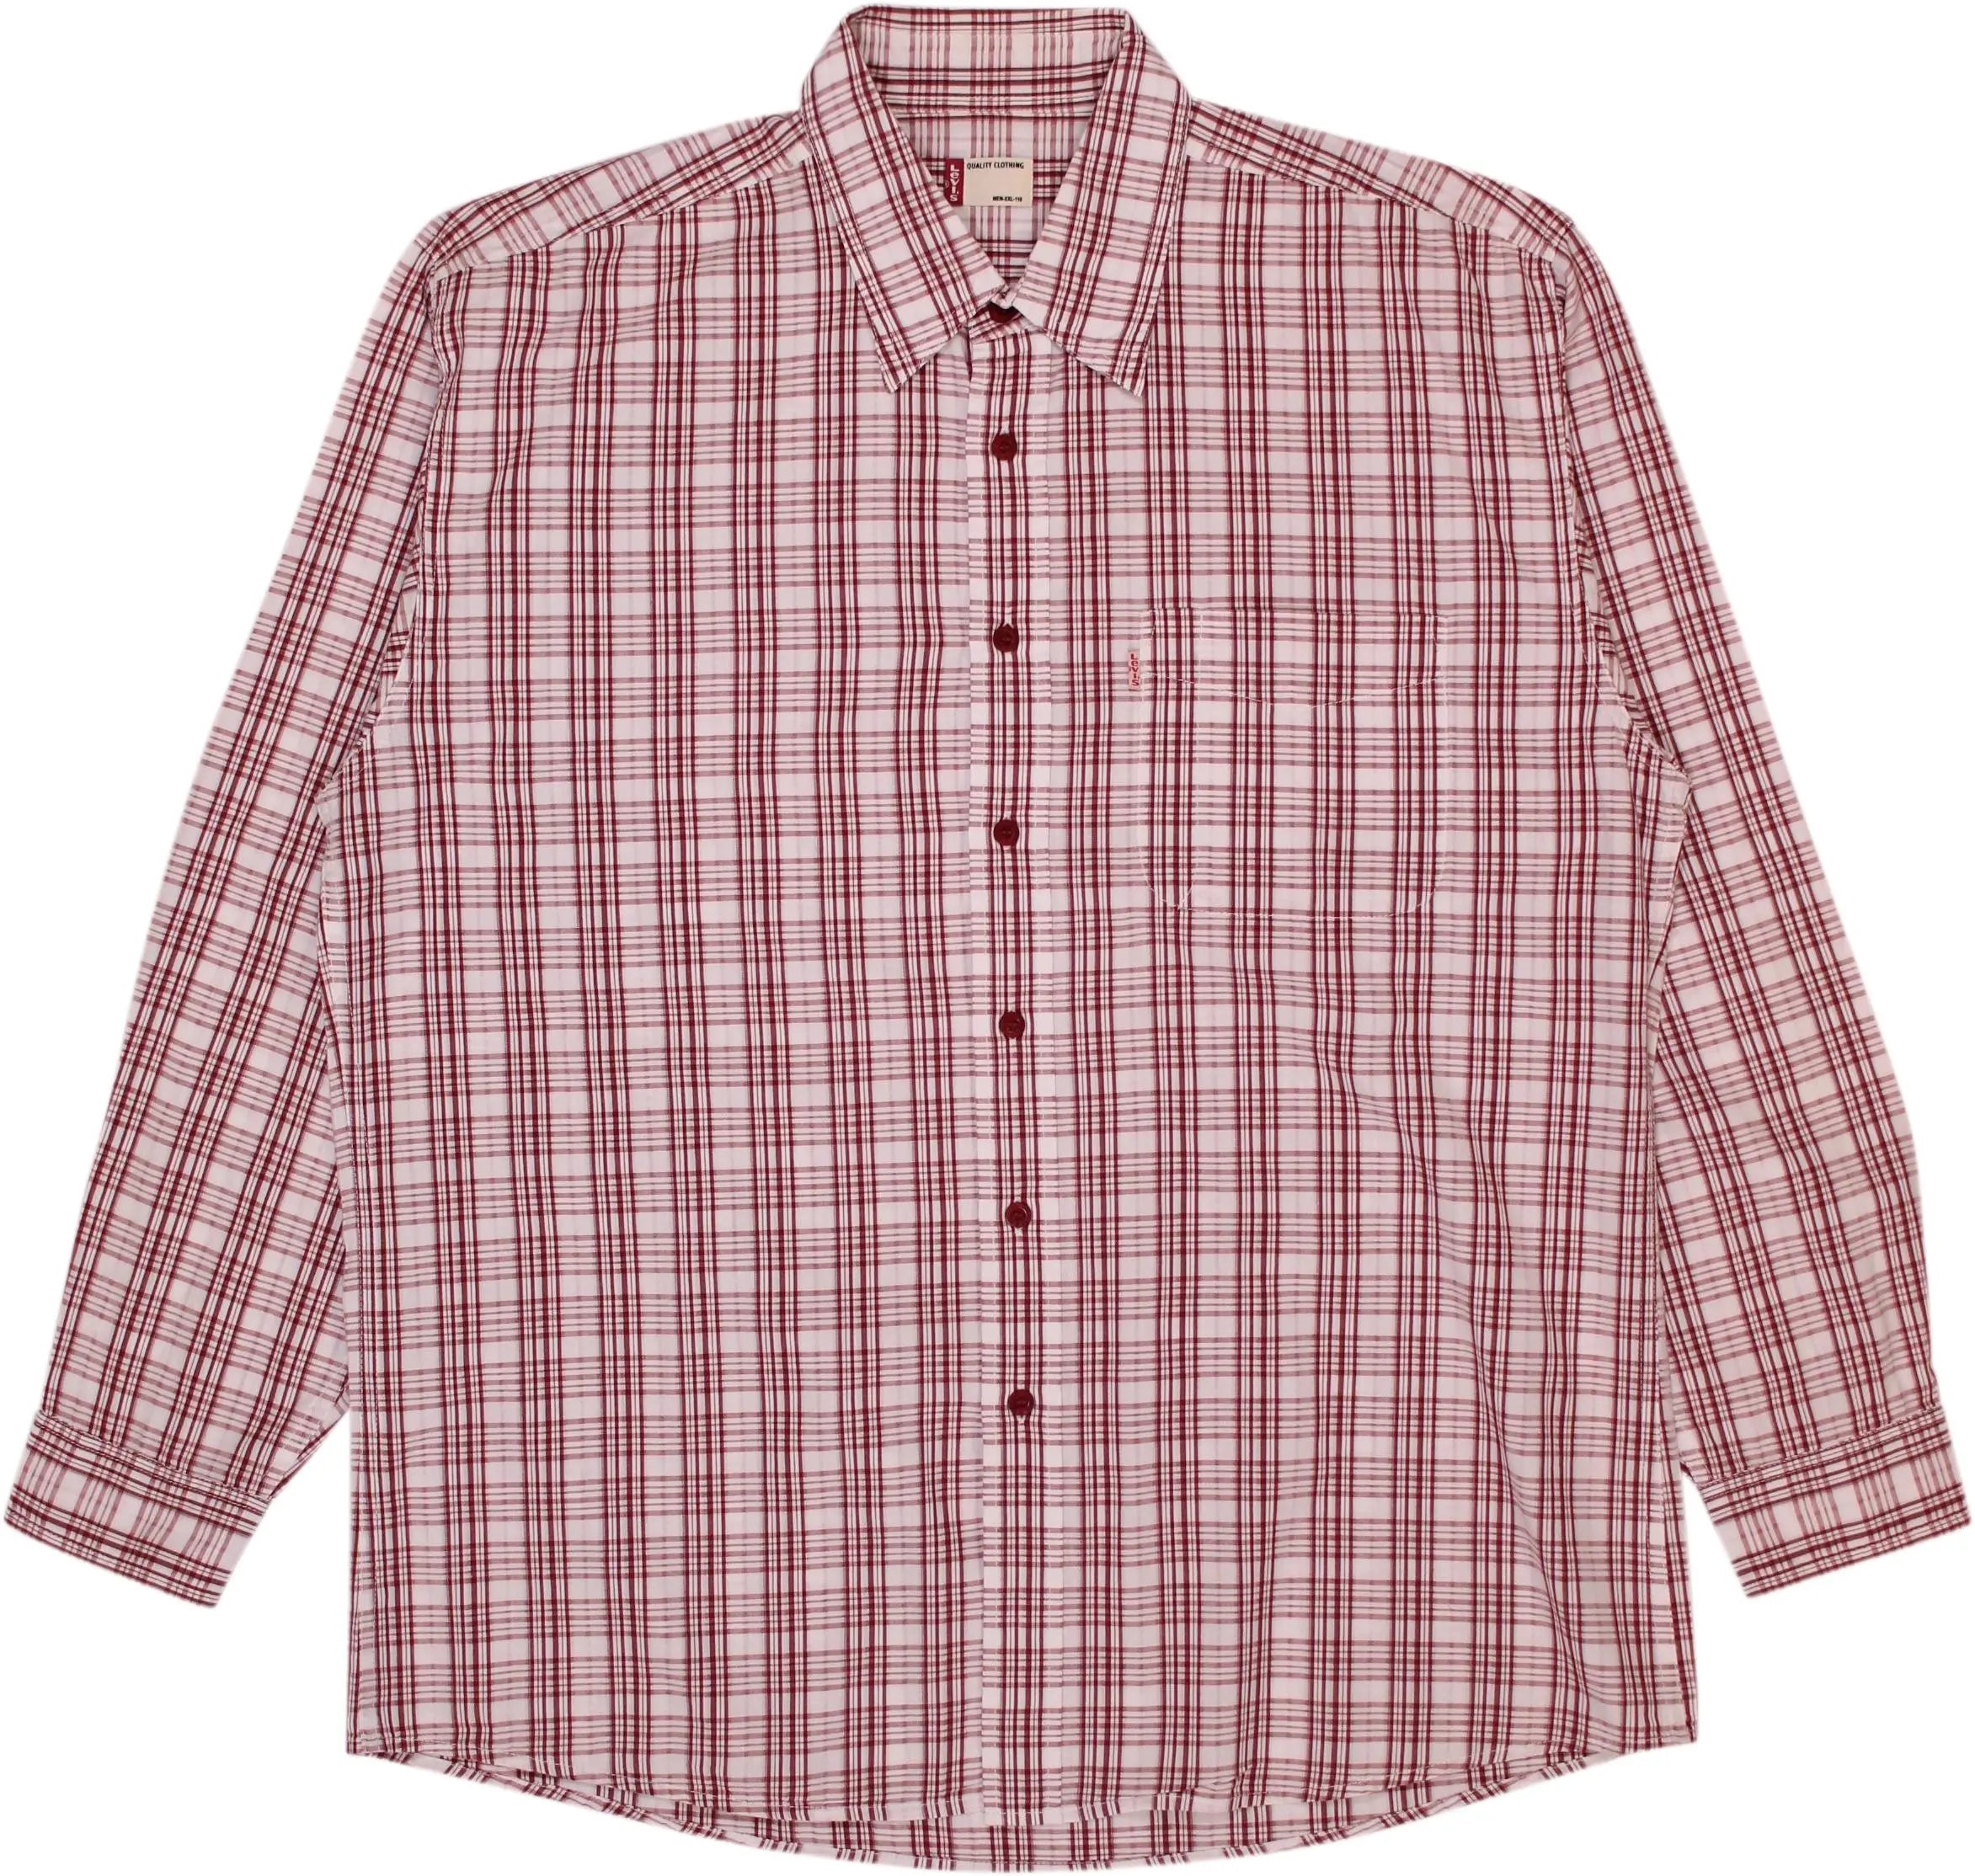 Levi's - Red Checked Shirt by Levi's- ThriftTale.com - Vintage and second handclothing